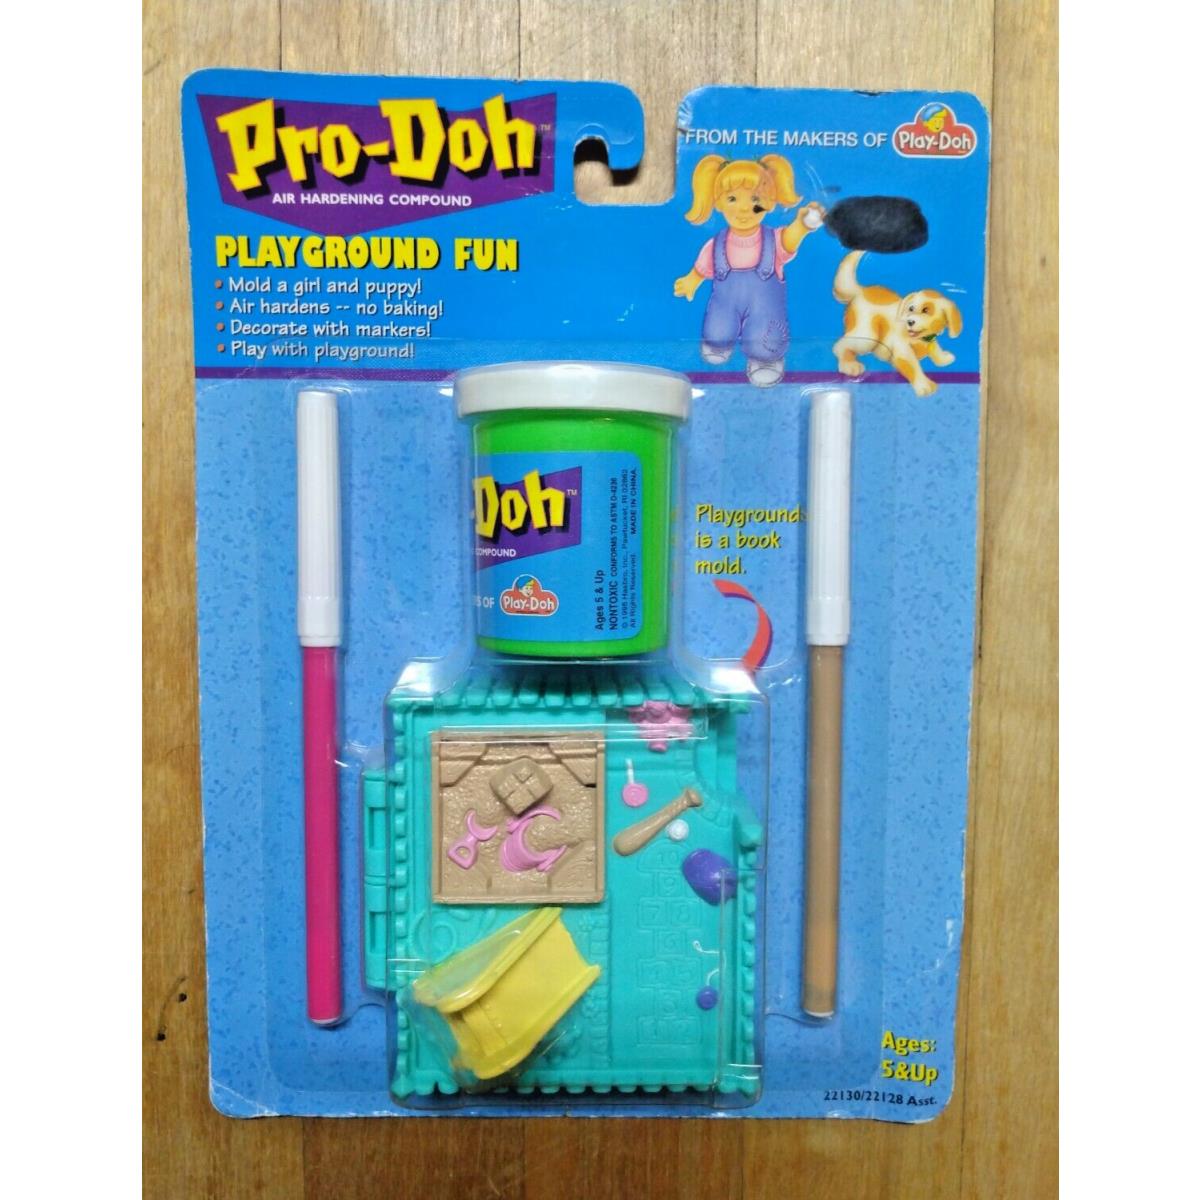 Pro-doh Playground Fun Set in Package Play-doh Hasbro 90`s Toys 1995